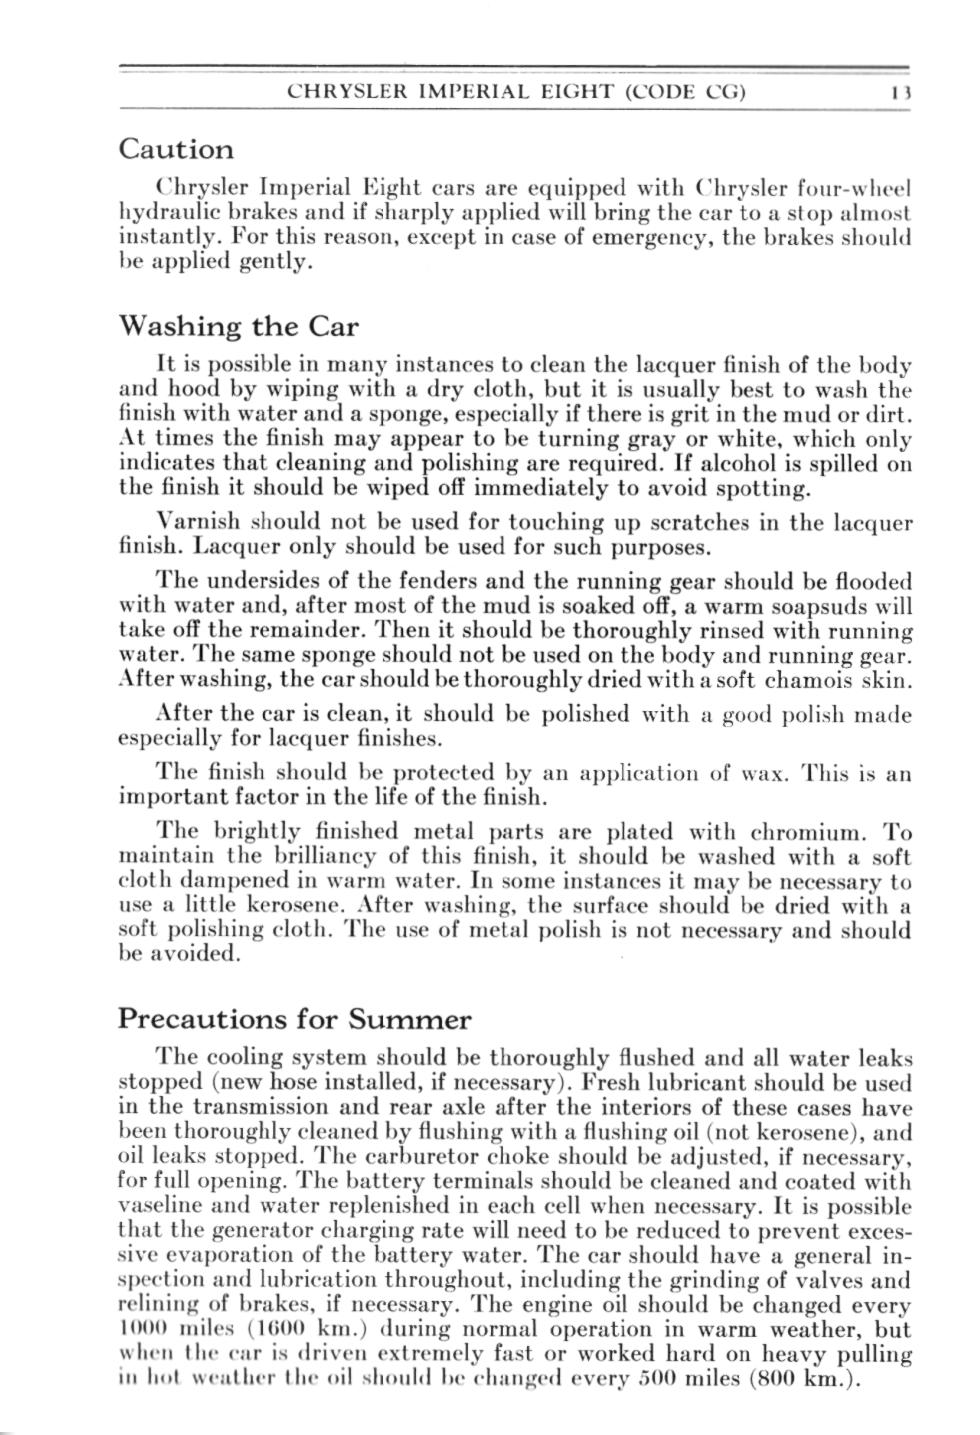 1931 Chrysler Imperial Owners Manual Page 77